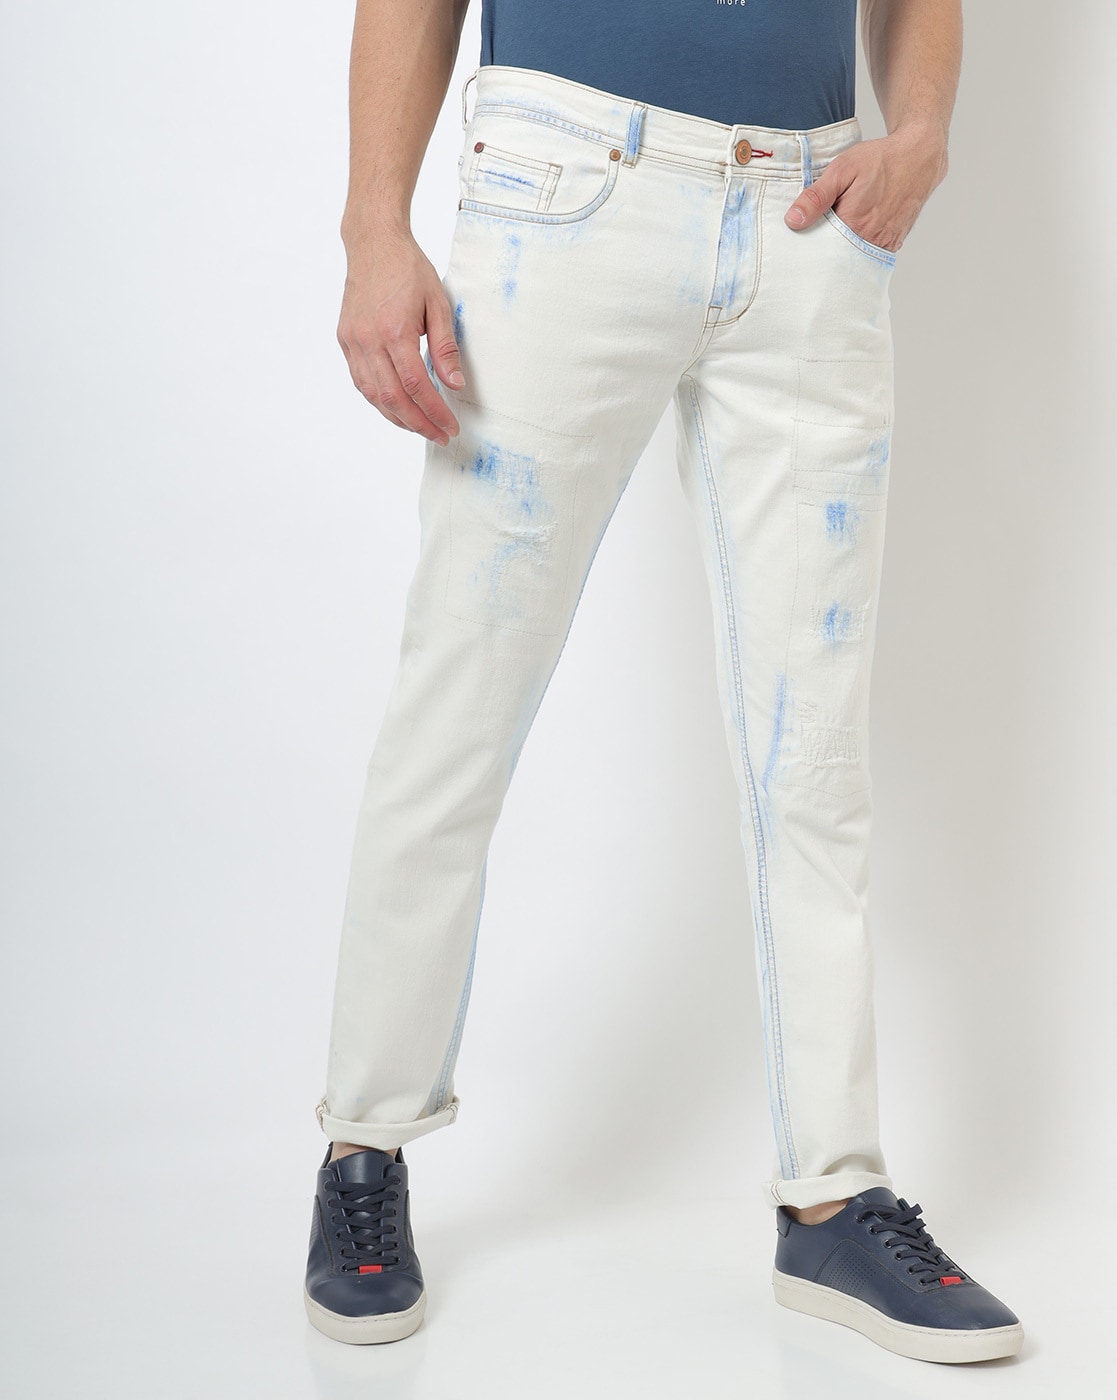 MIXT by Nykaa Fashion Off White Straight Fit High Waist Denims Buy MIXT by  Nykaa Fashion Off White Straight Fit High Waist Denims Online at Best Price  in India  Nykaa